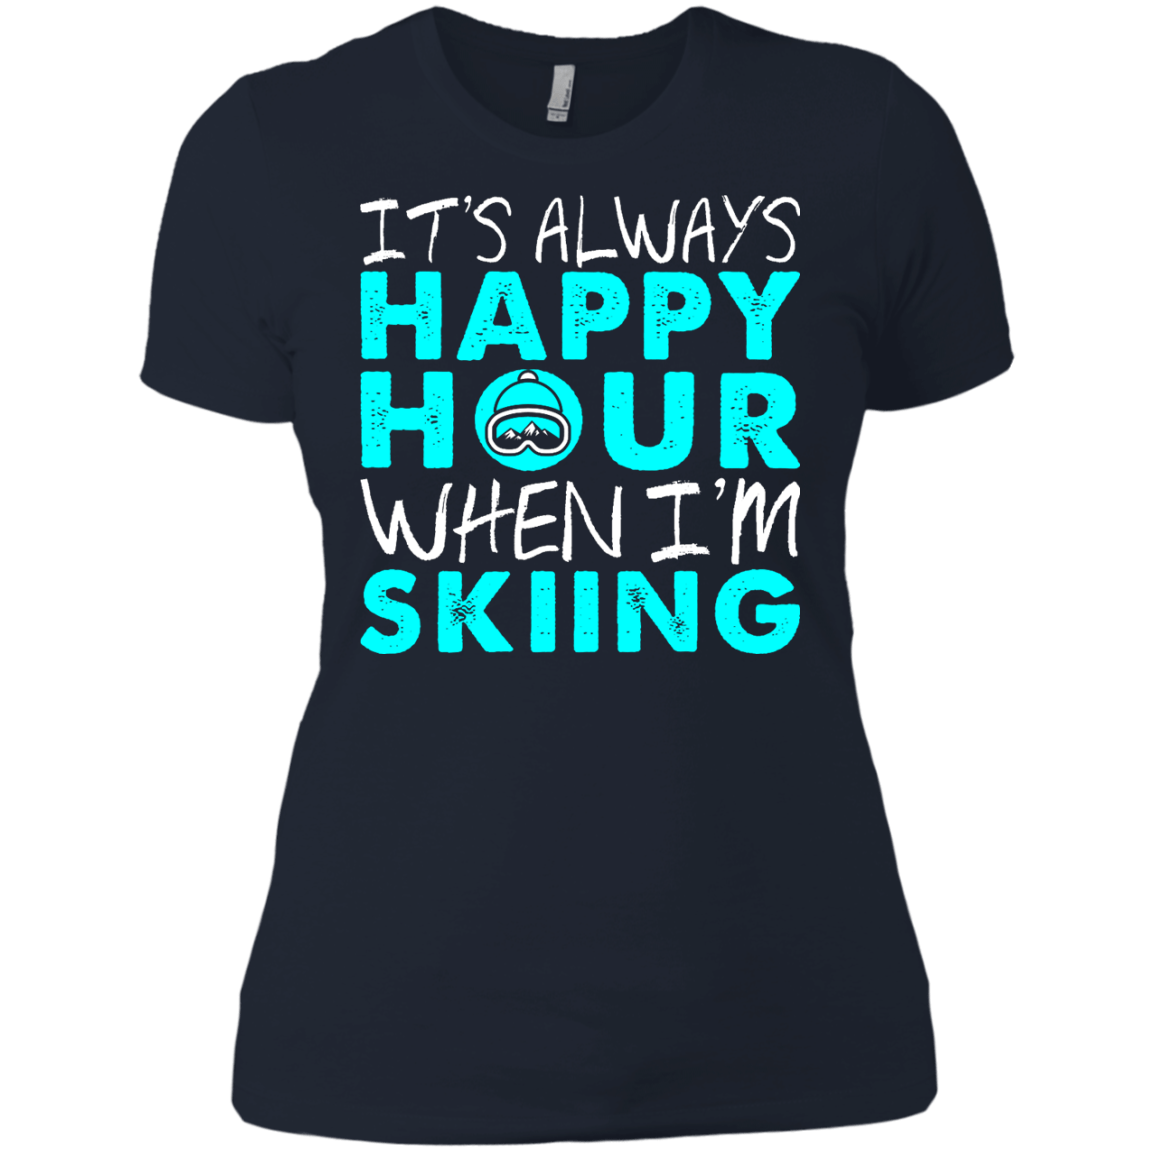 It's Always Happy Hour When I'm Skiing Ladies Tees and V-Neck - Powderaddicts